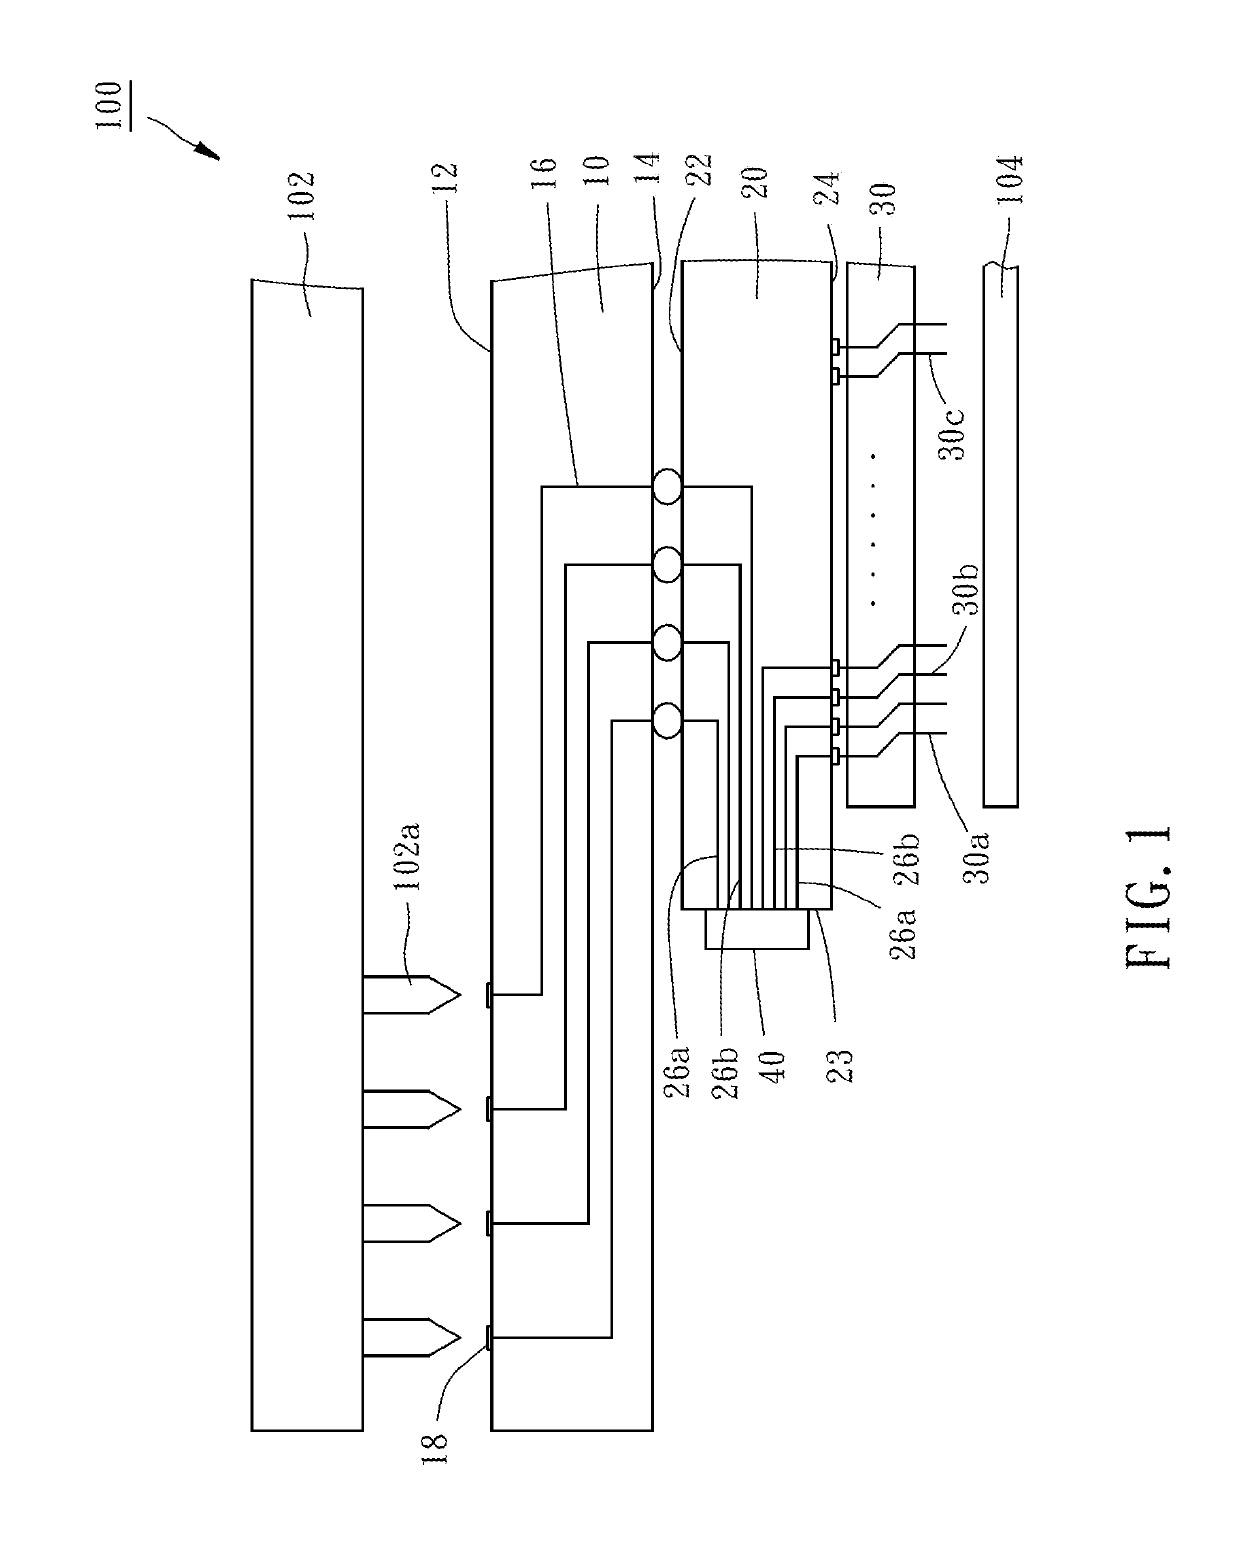 Probe card and signal path switching module assembly